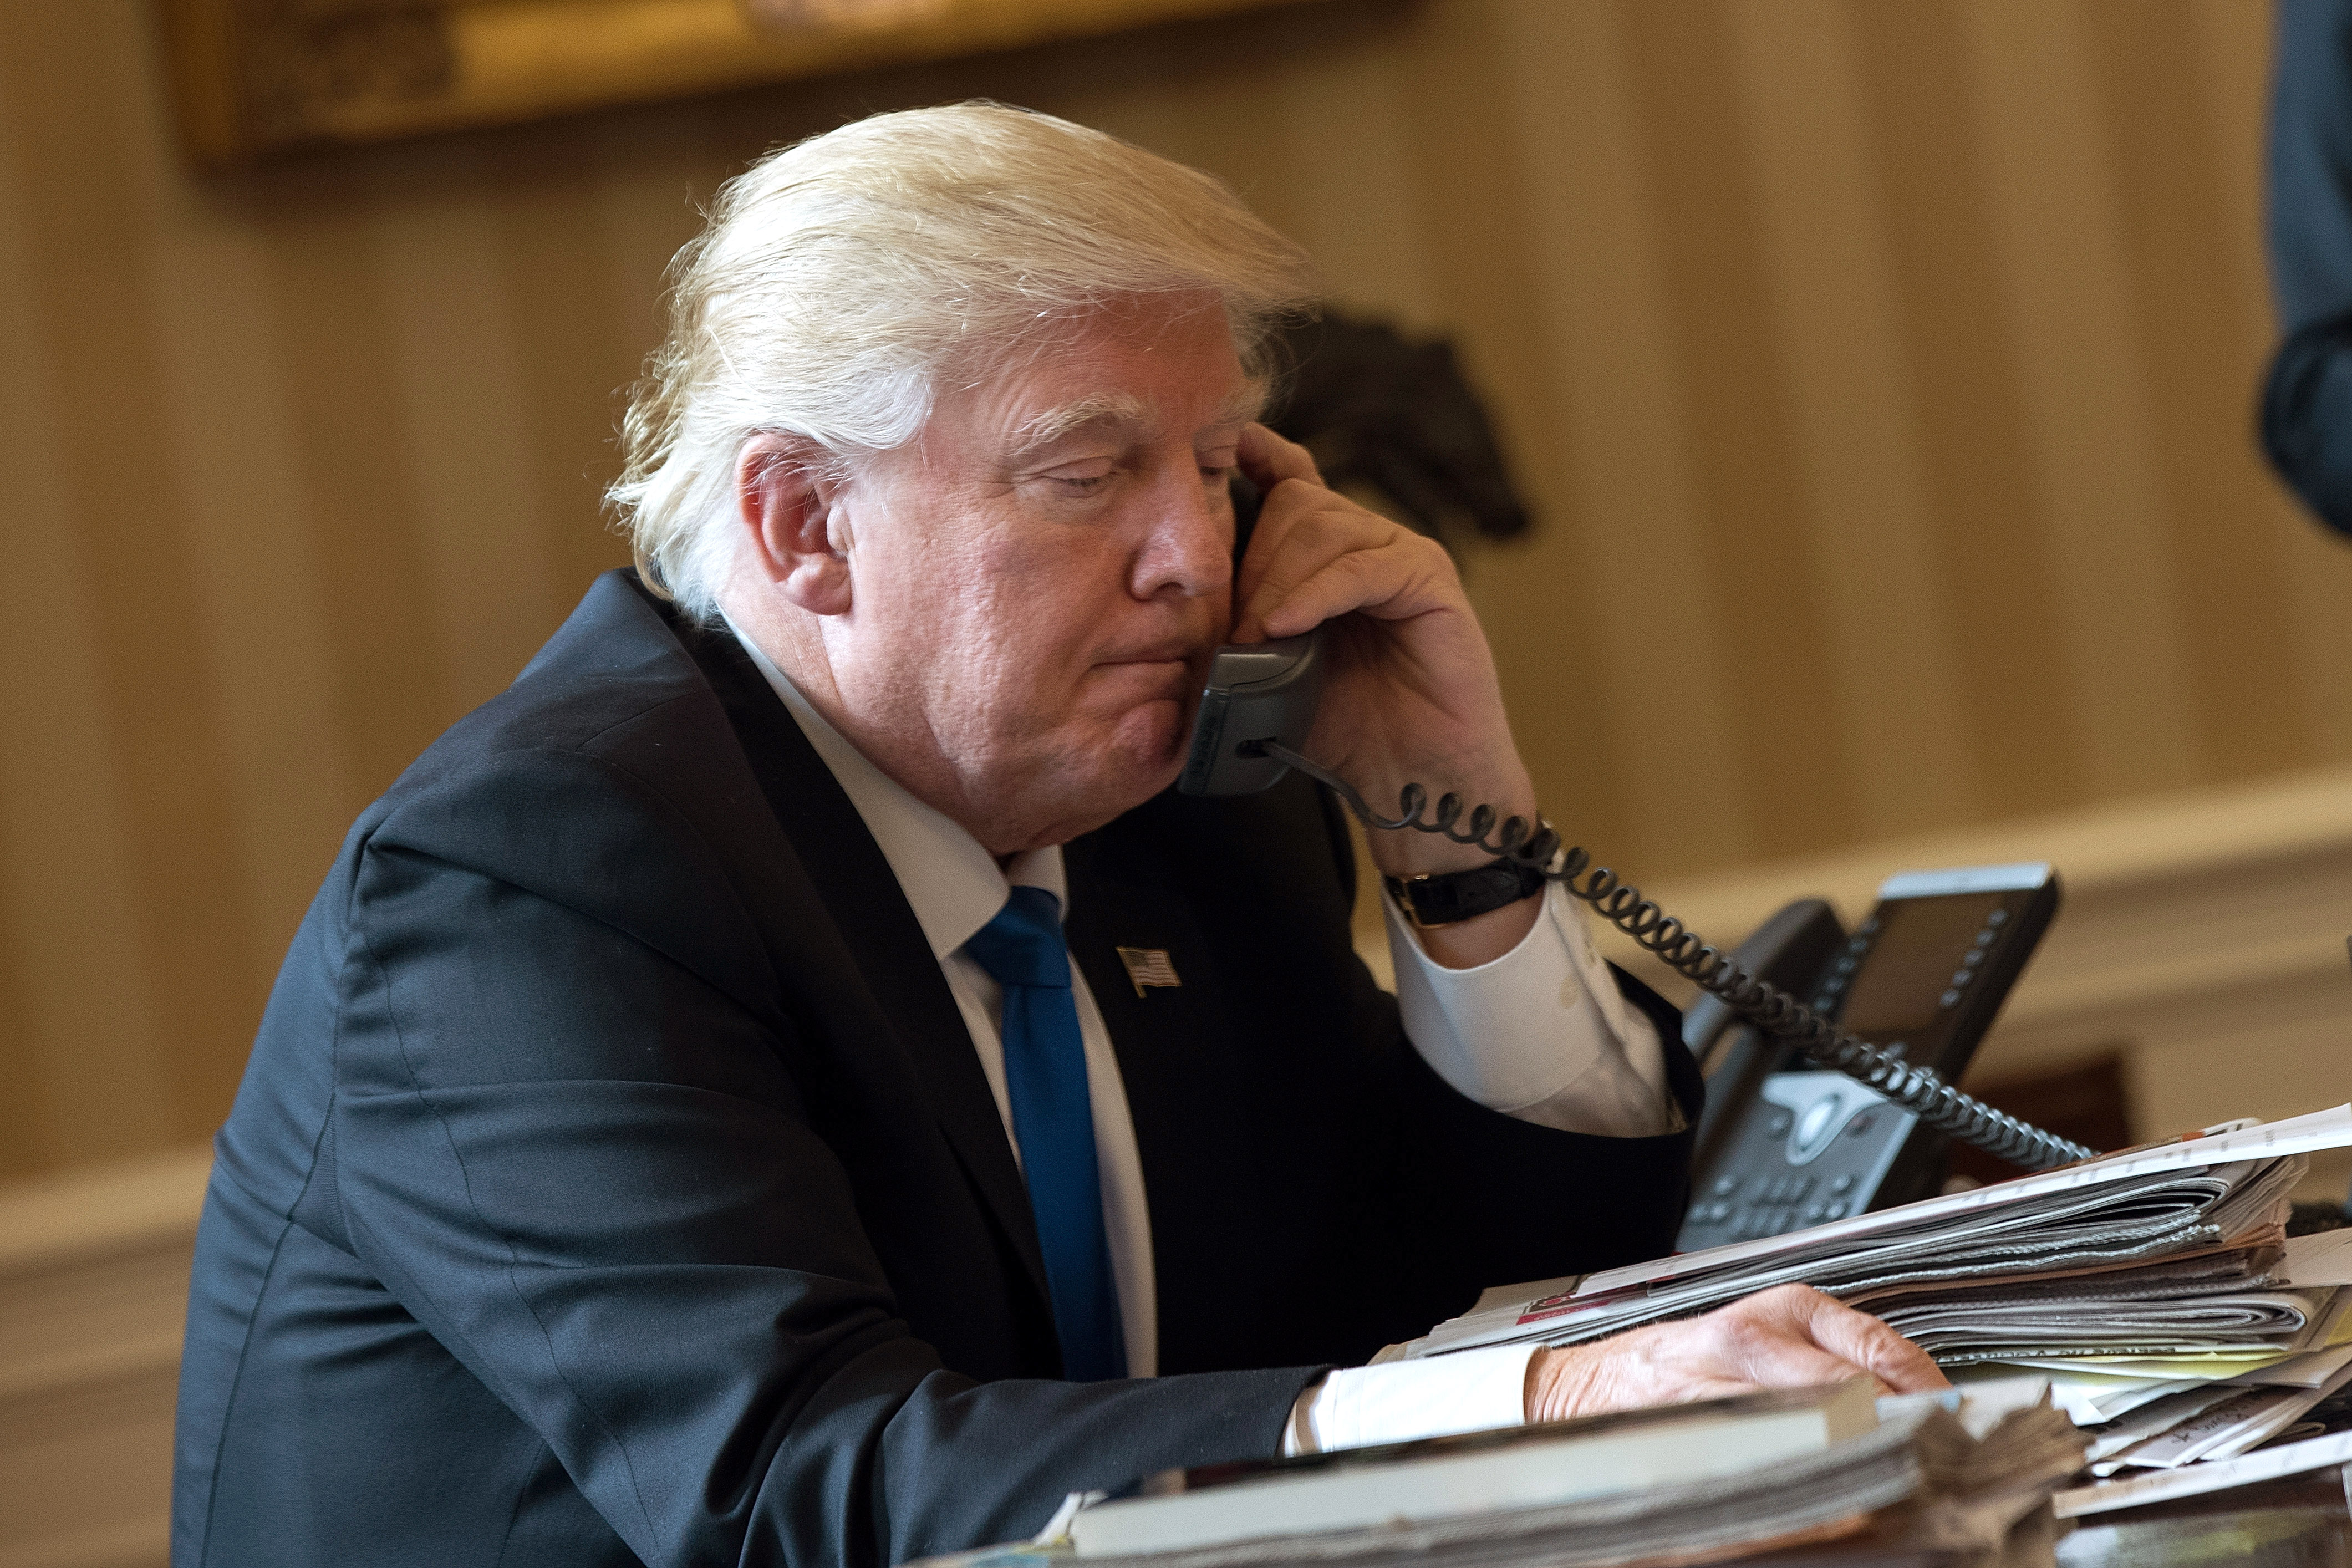 President Trump speaks on the phone in the Oval Office of the White House, on Jan. 28, 2017. (Drew Angerer—Getty Images)